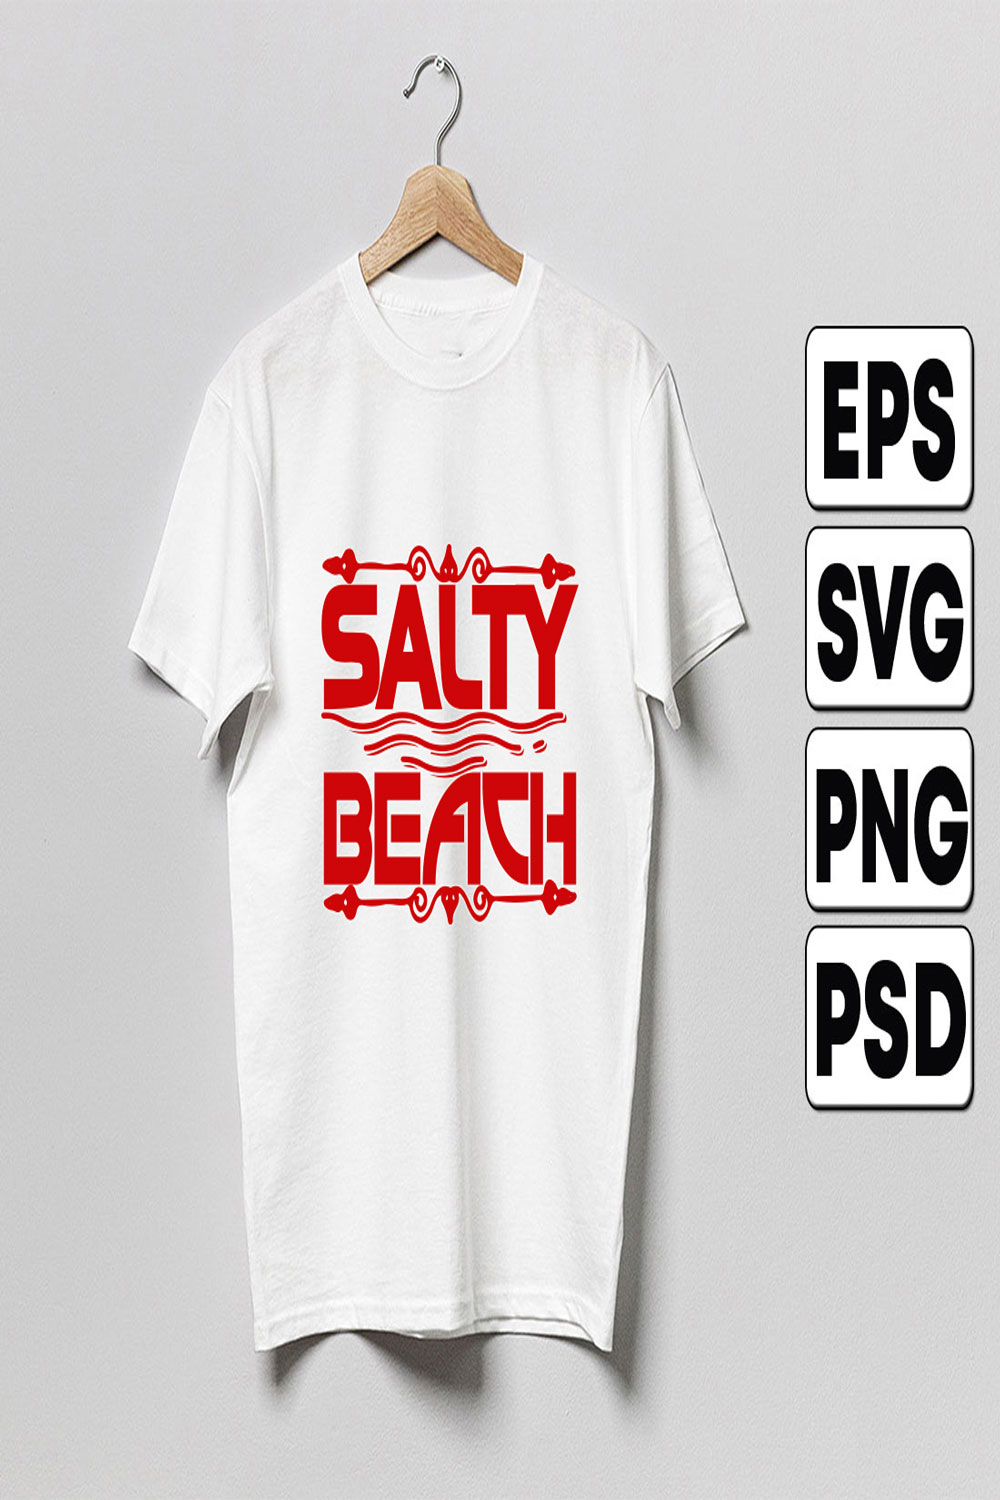 Salty beach pinterest preview image.